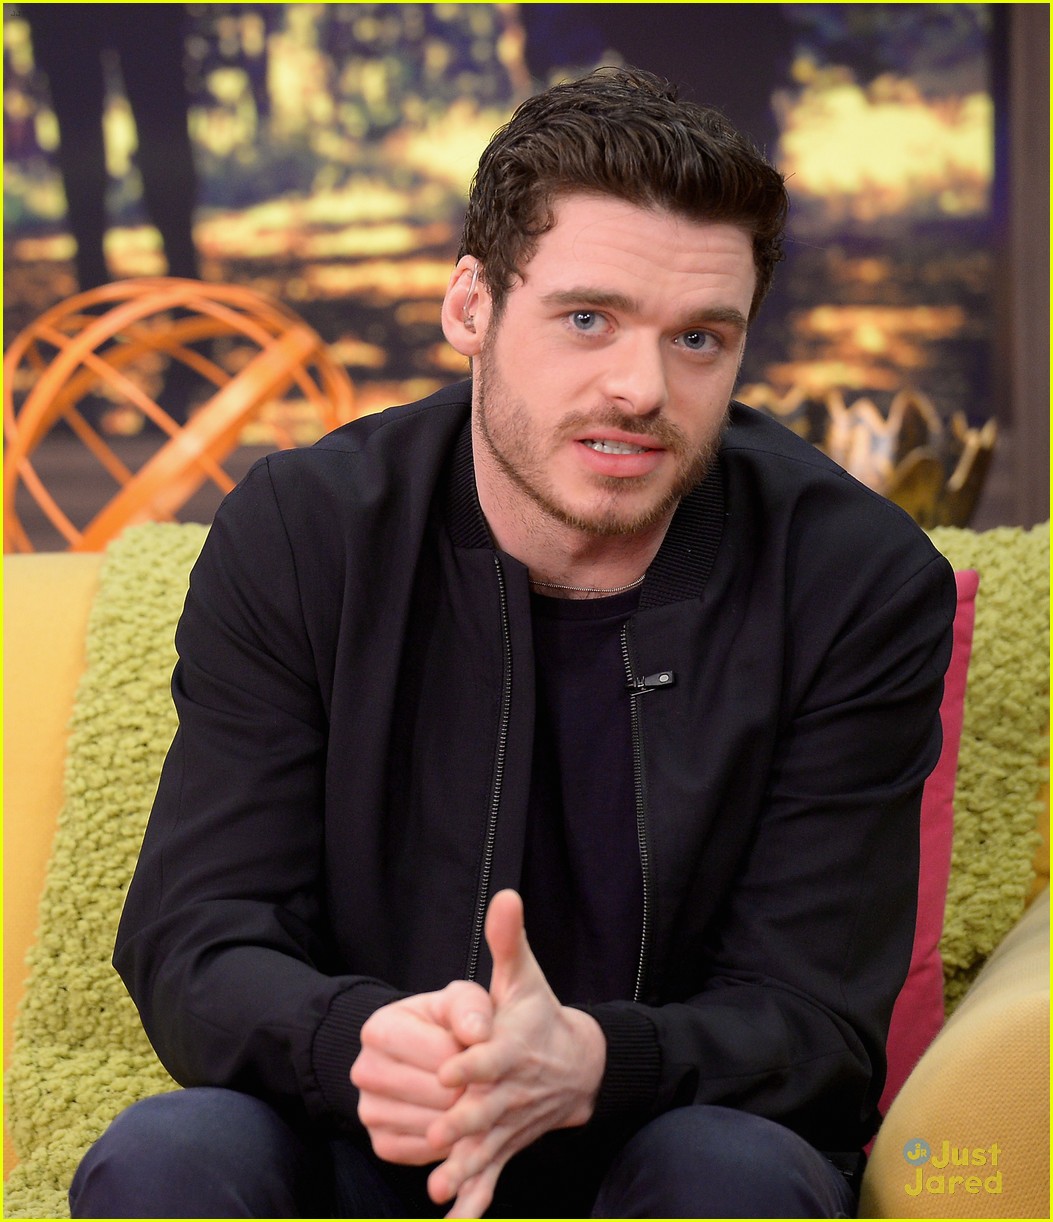 cinderellas richard madden charms us with this cute puppy 14